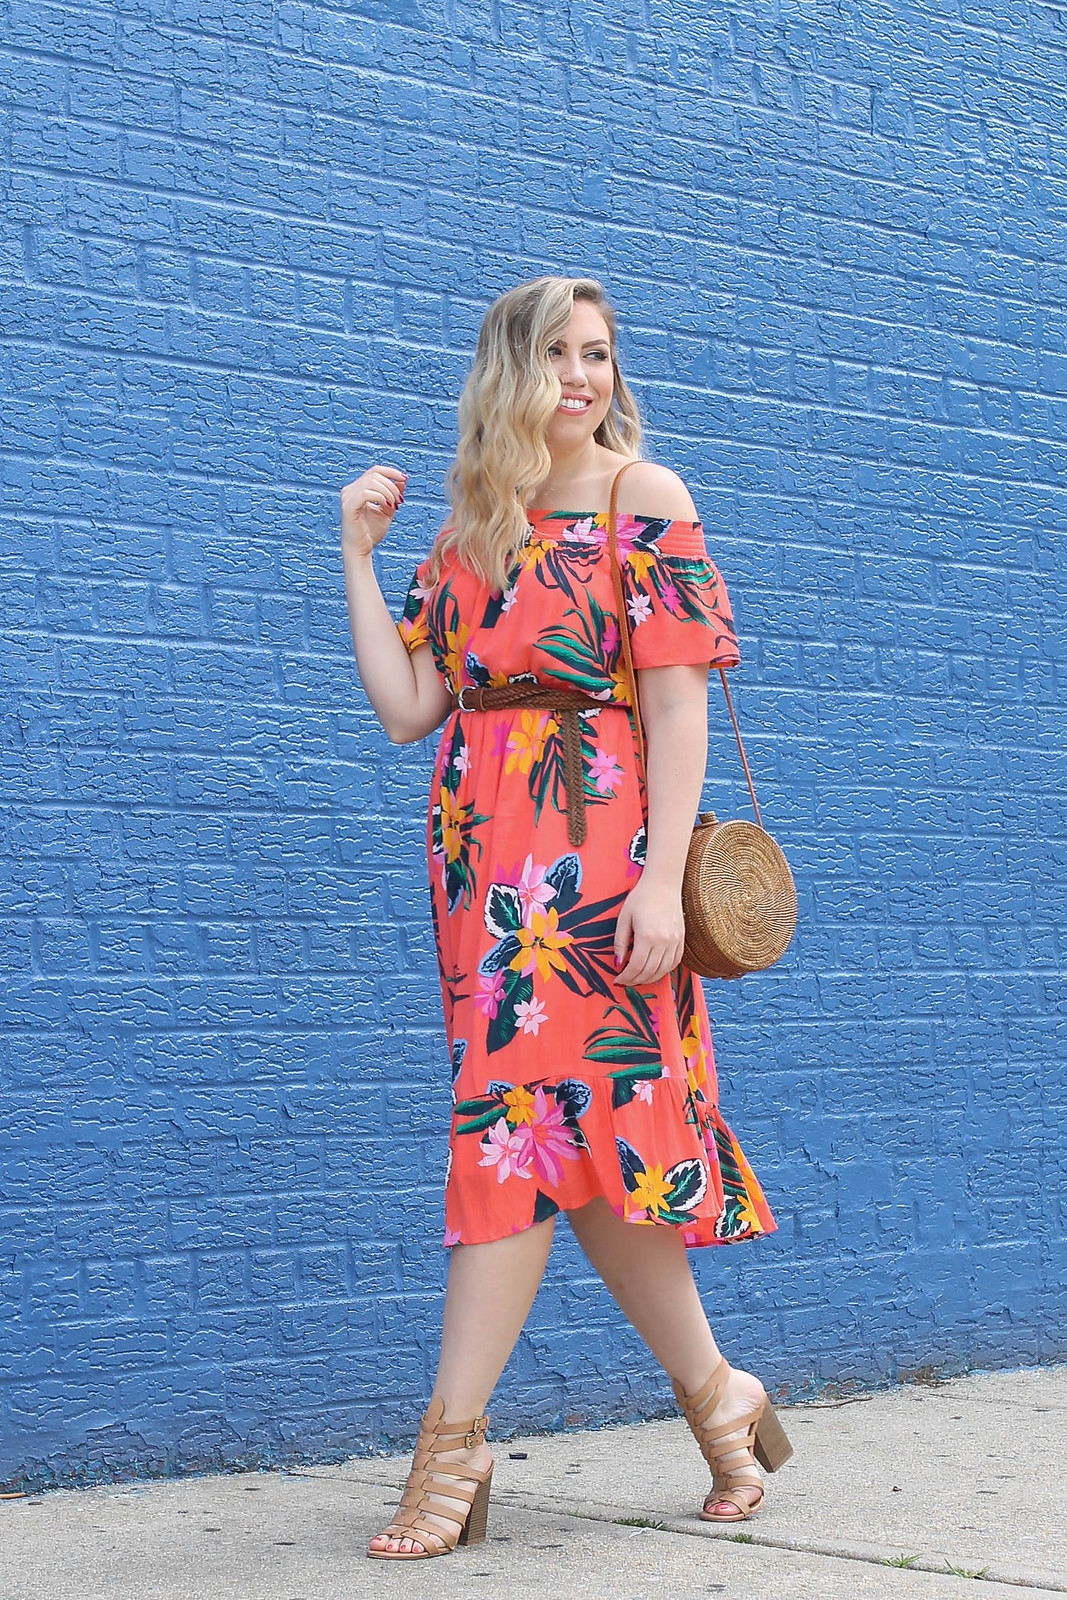 Coral Floral Off Shoulder Summer Dress Under $40 Bright Blue Brick Wall Colorful Outfit Inspiration